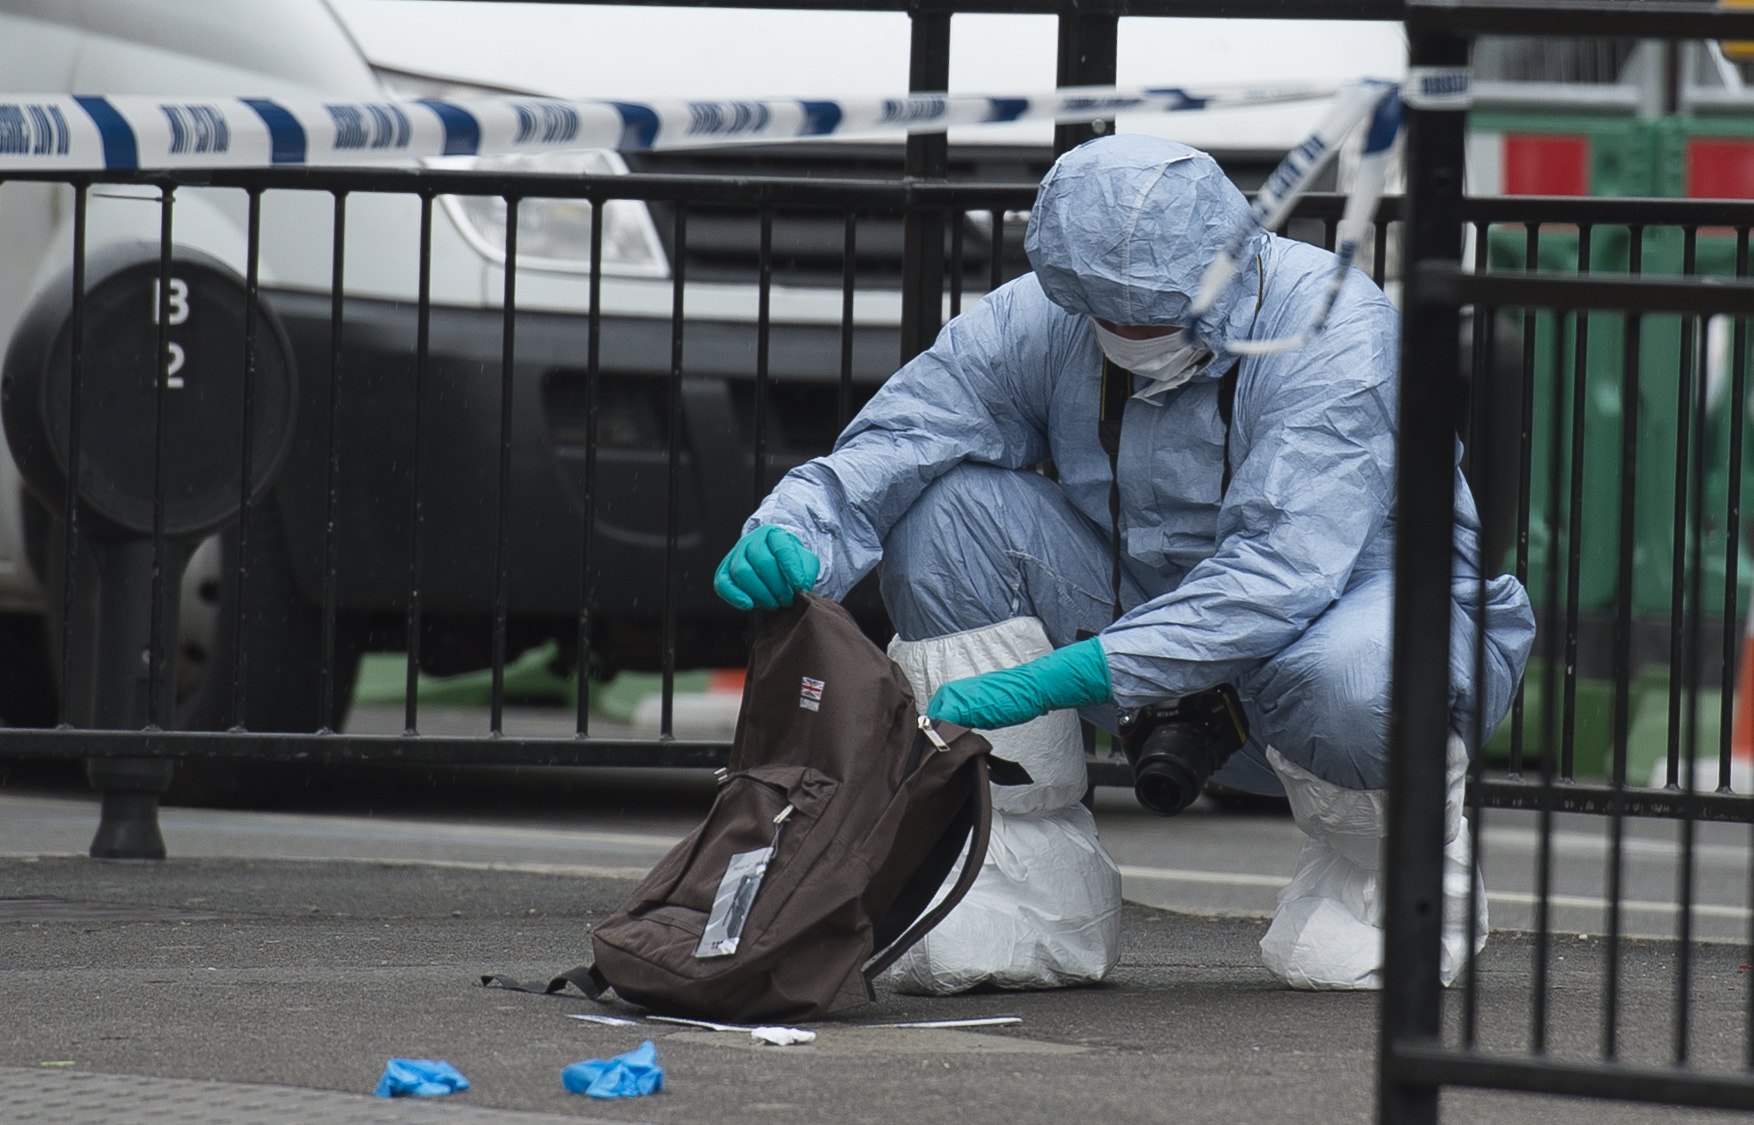 PHOTO: A forensic officer examines items left on the pavement after police lead away a man following an incident in Central London, April 27, 2017.